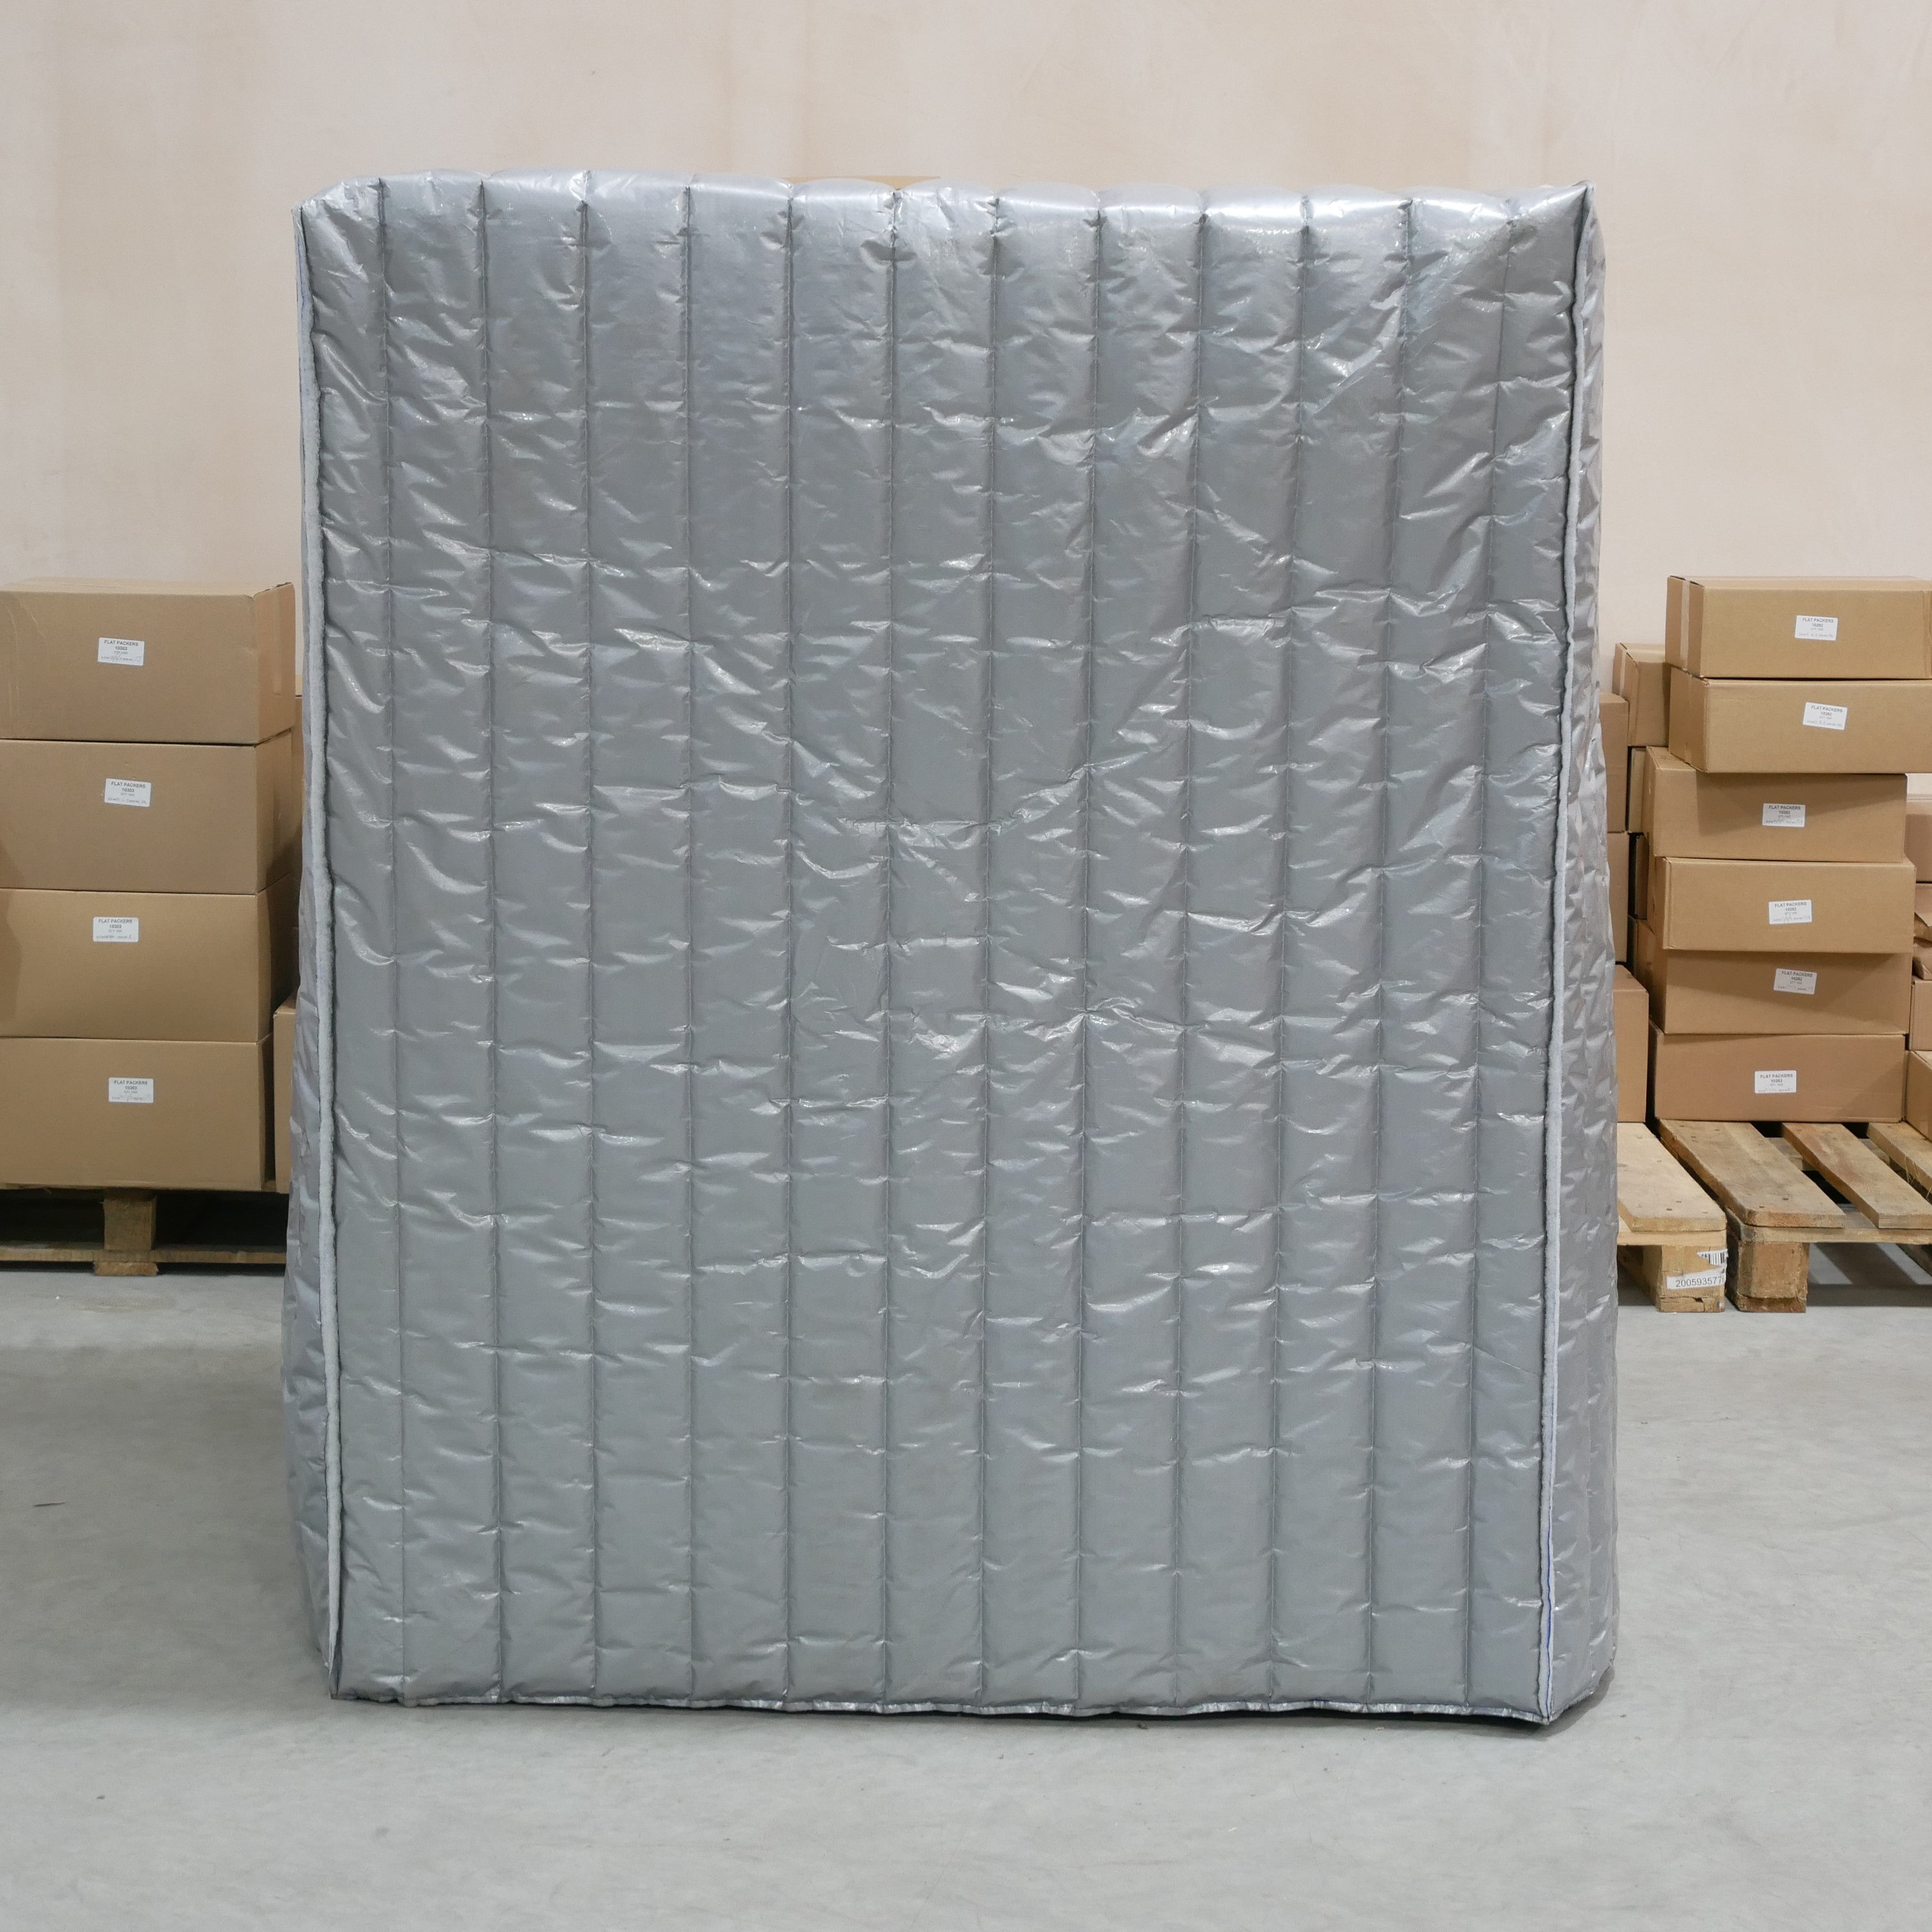 Thermal Palband Pallet Covers - Insulated Material To suit UK Pallets